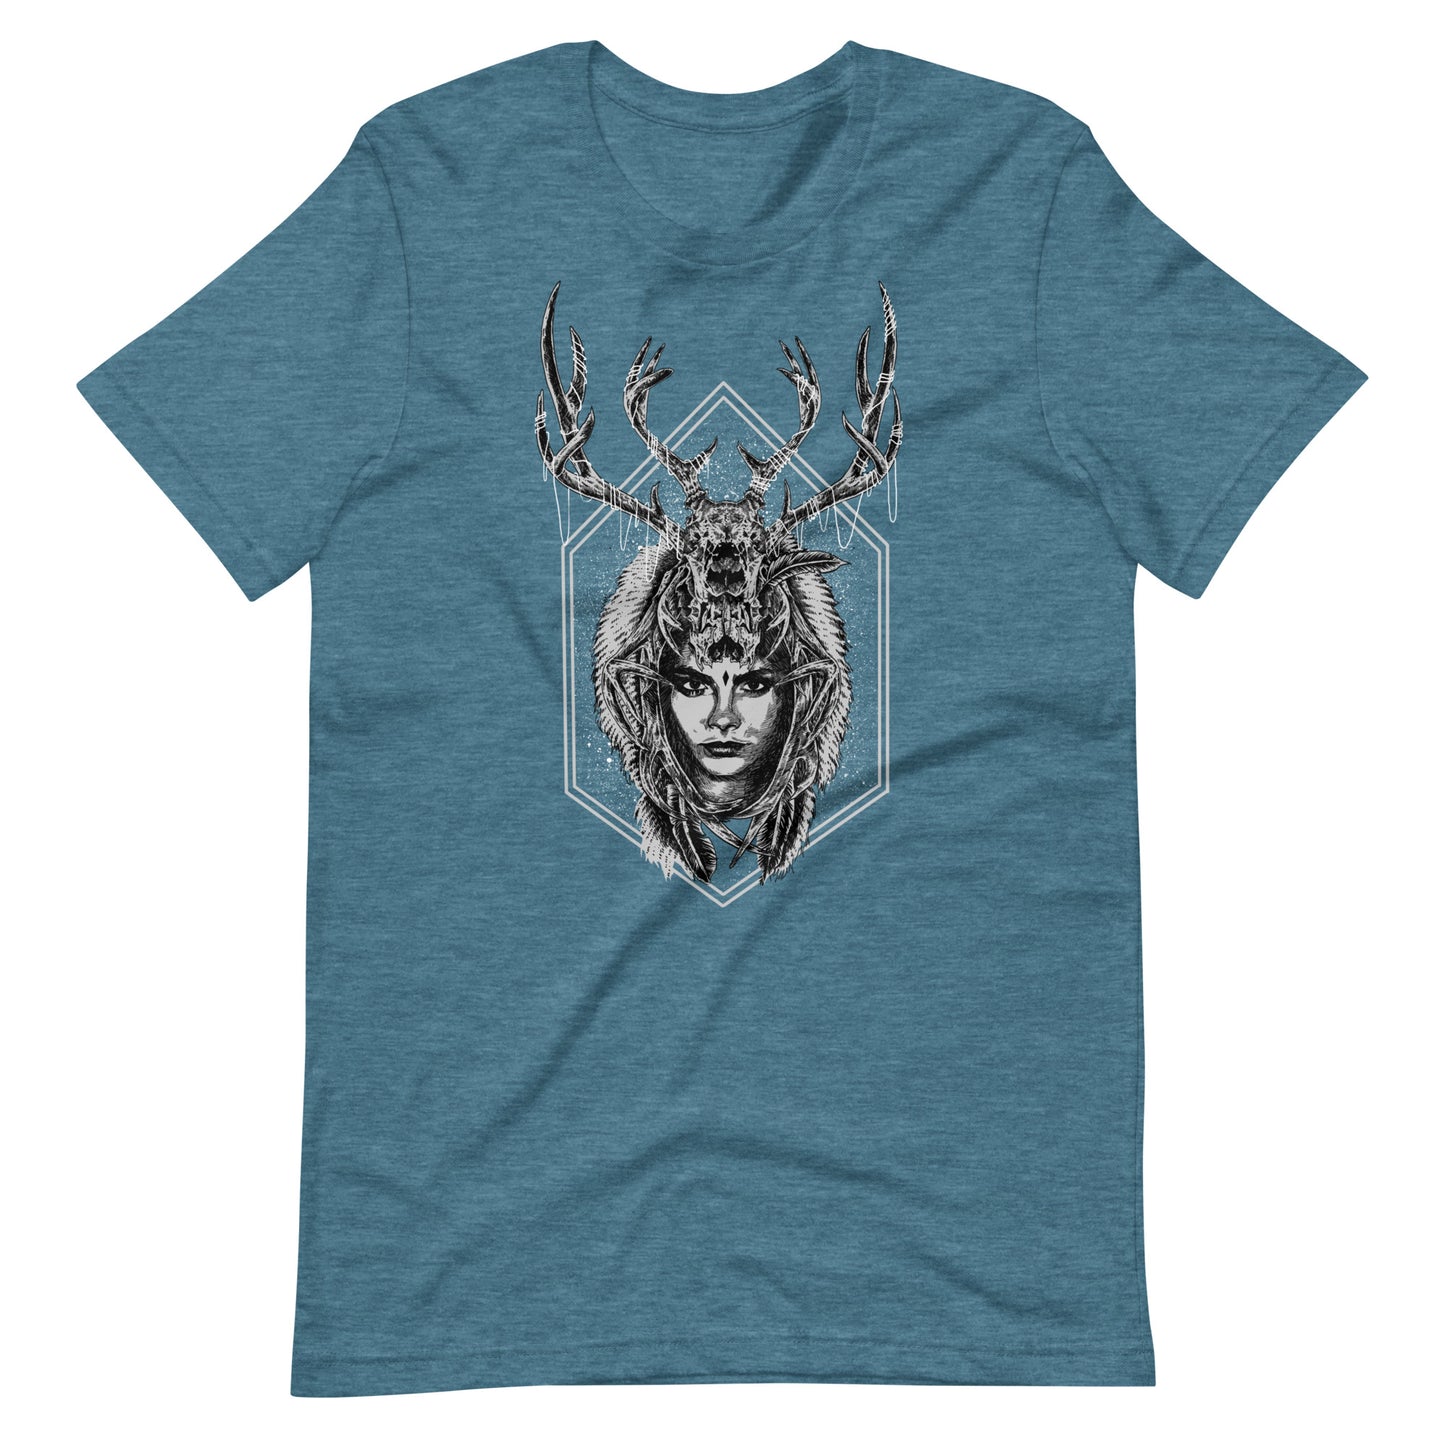 Tribe Empire - Men's t-shirt - Heather Deep Teal Front